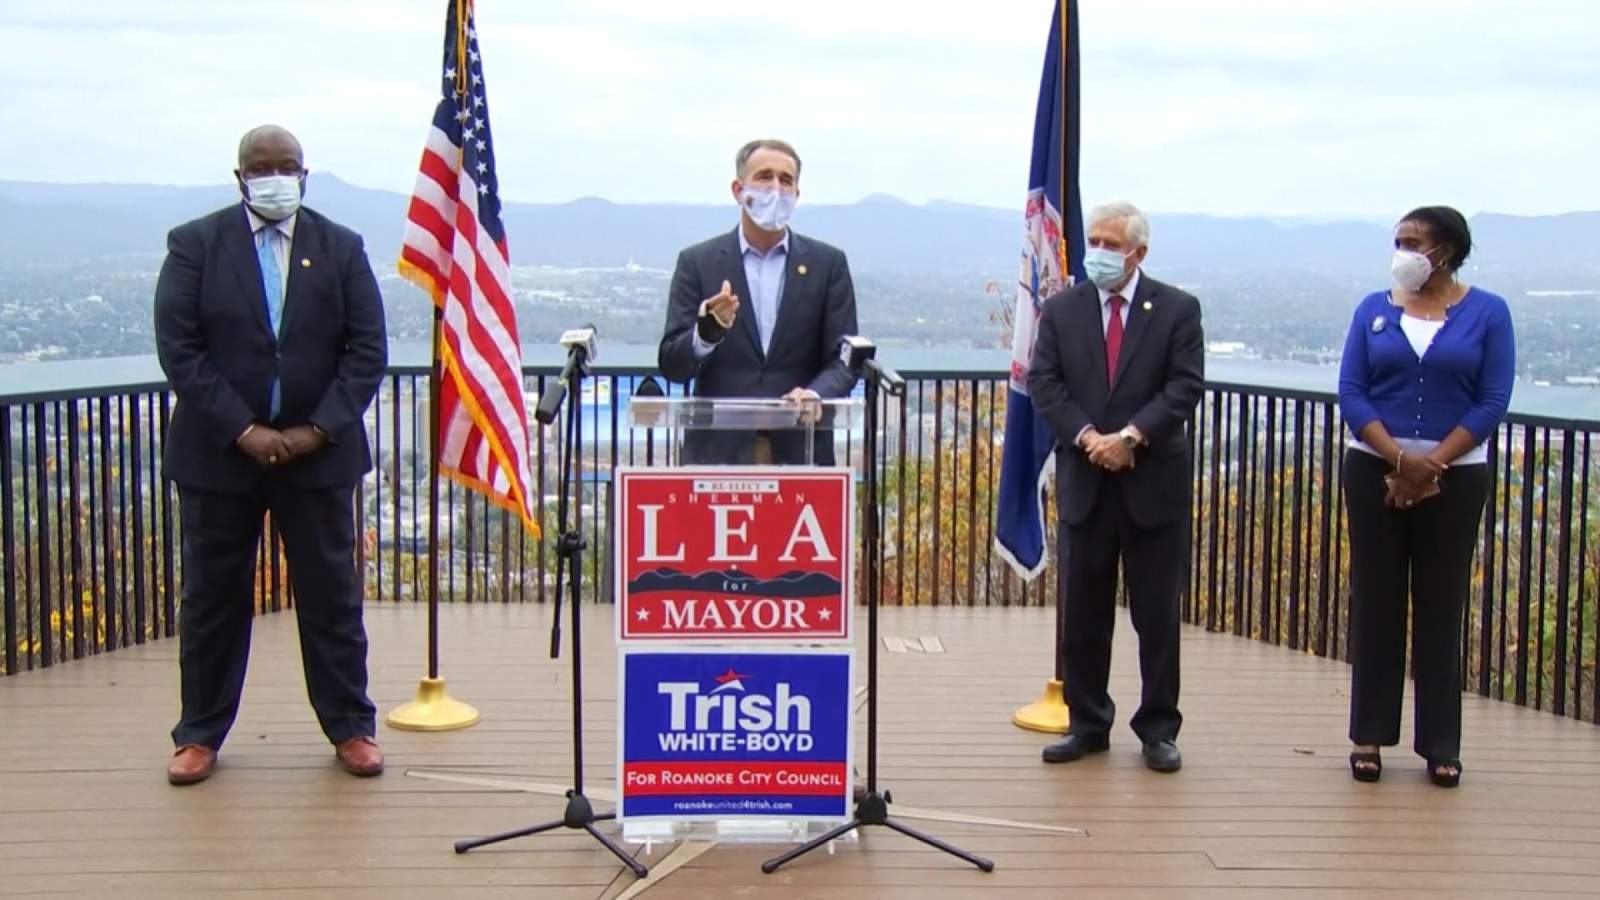 WATCH: Gov. Northam in Roanoke, campaigns for Mayor Sherman Lea, other Democrats